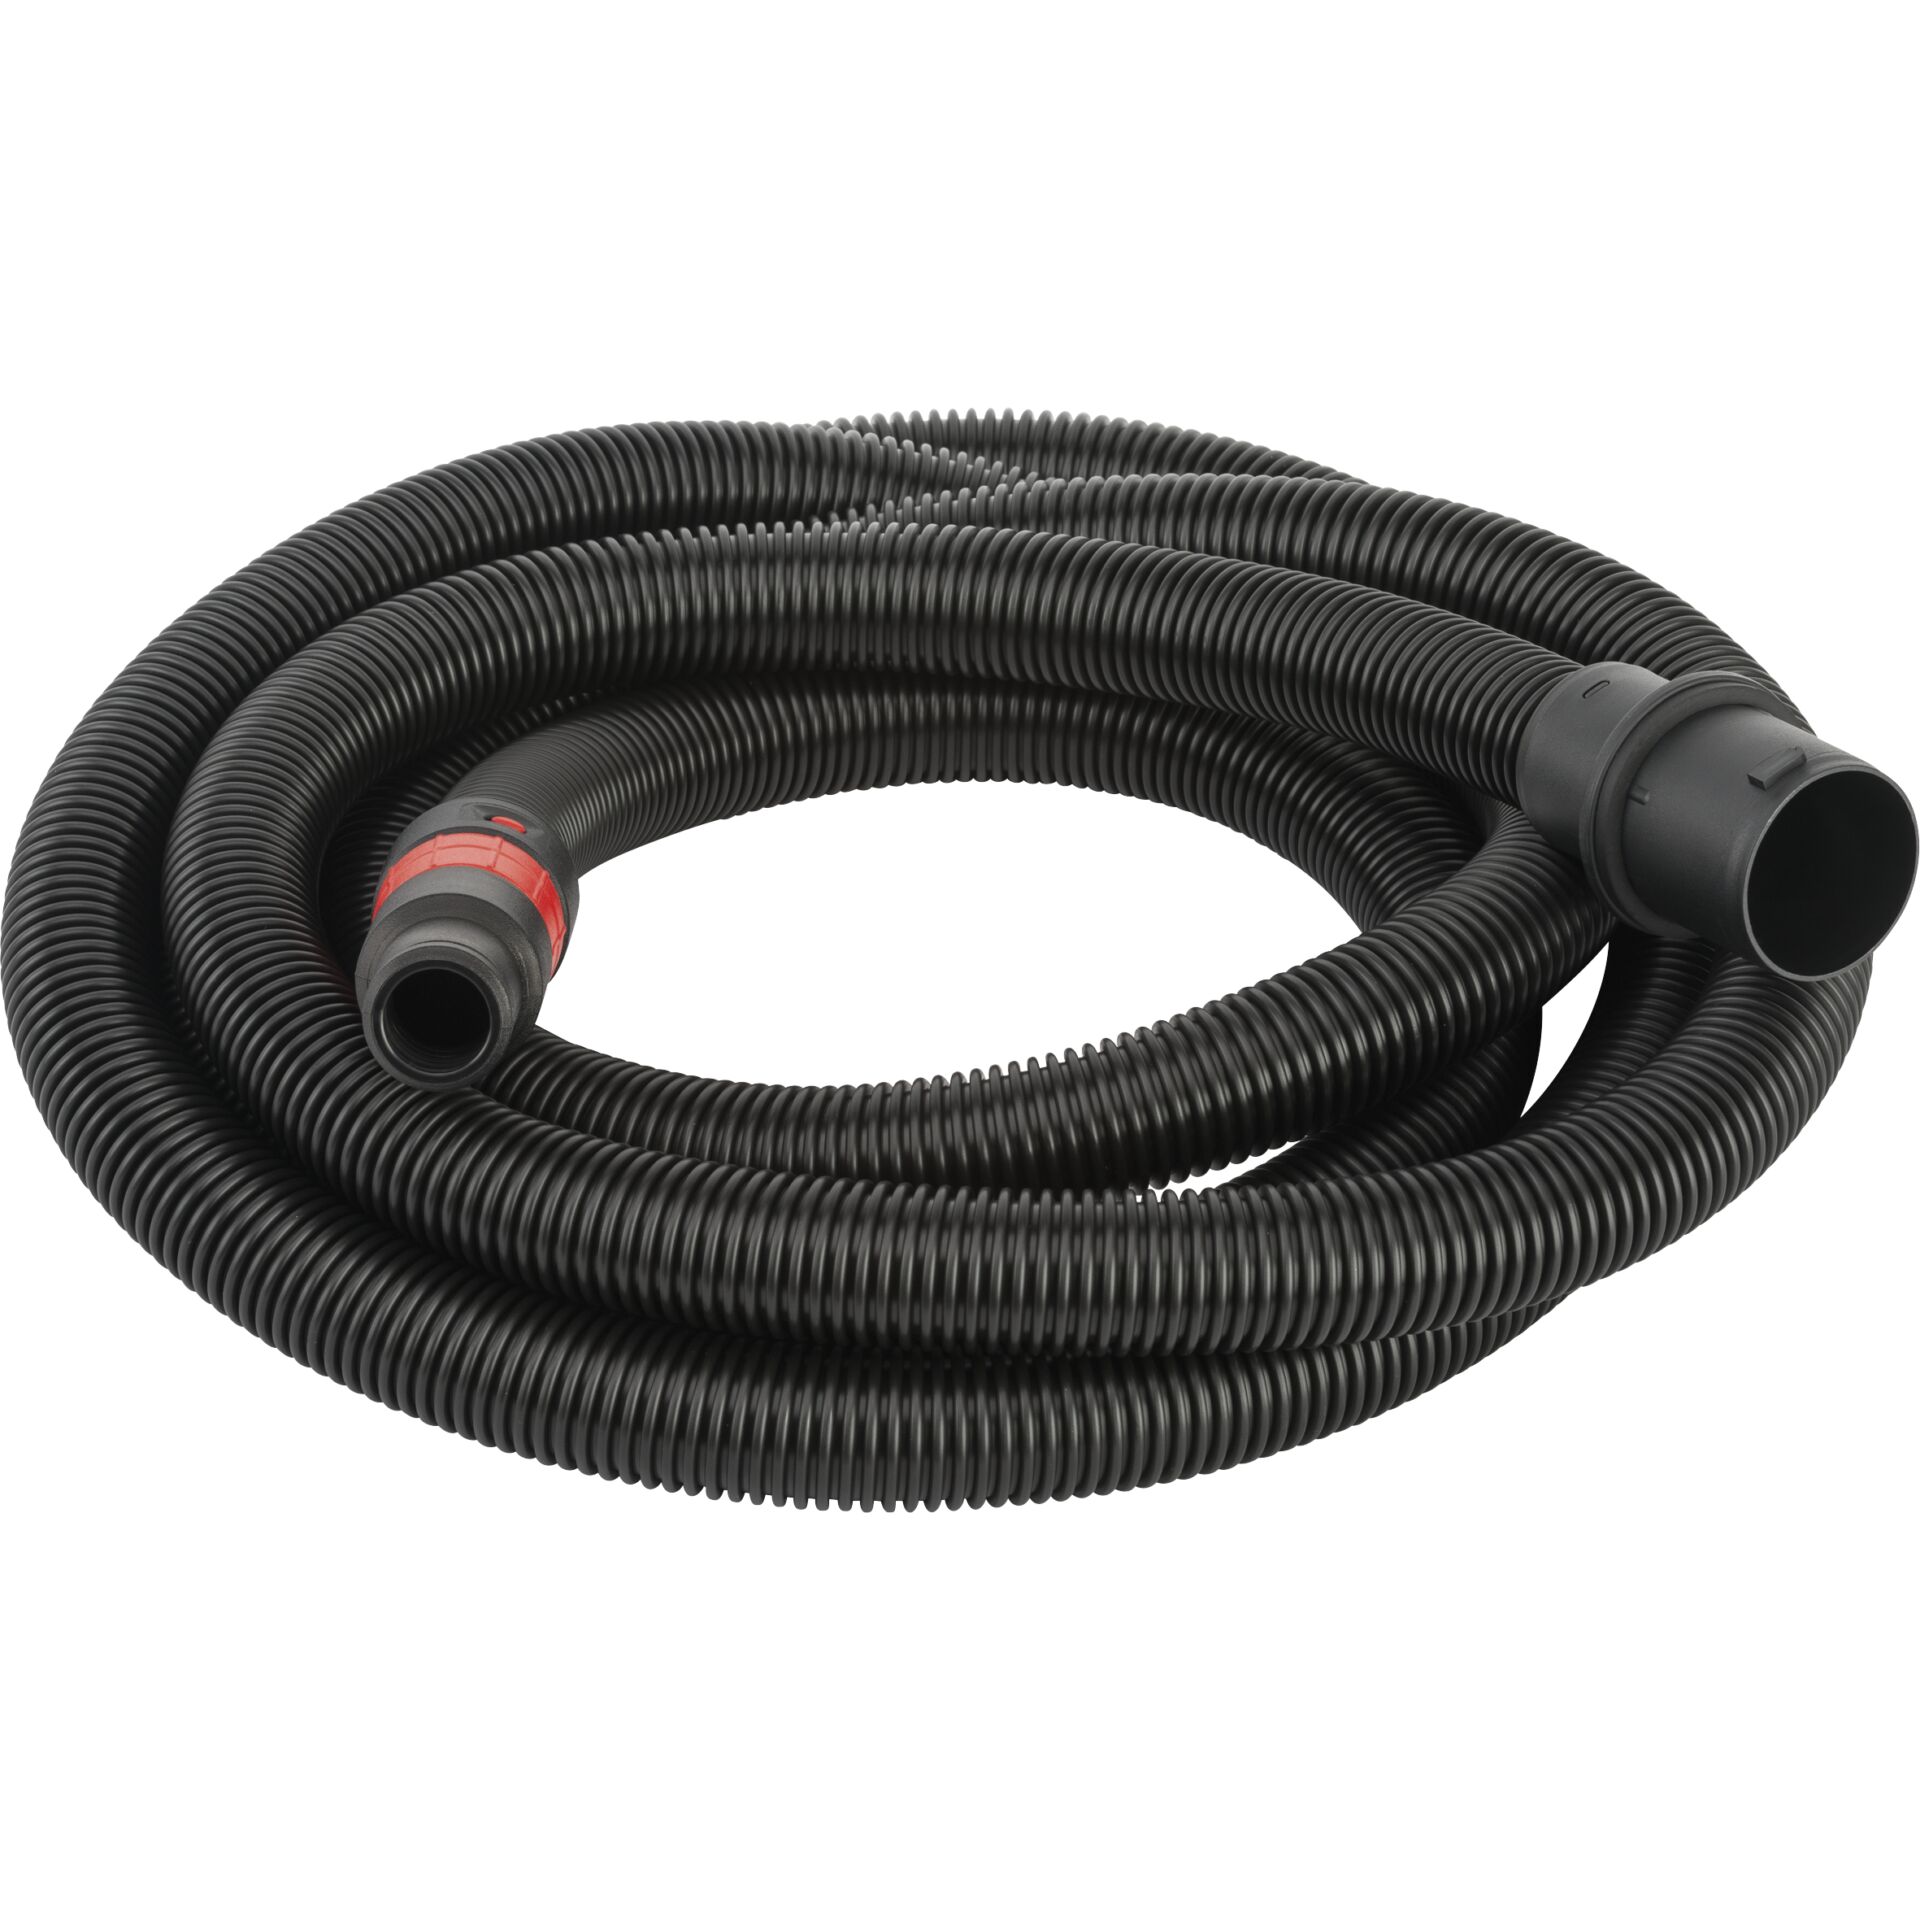 Bosch Dust Extractor Hose with Bayonet Lock 5m DN35